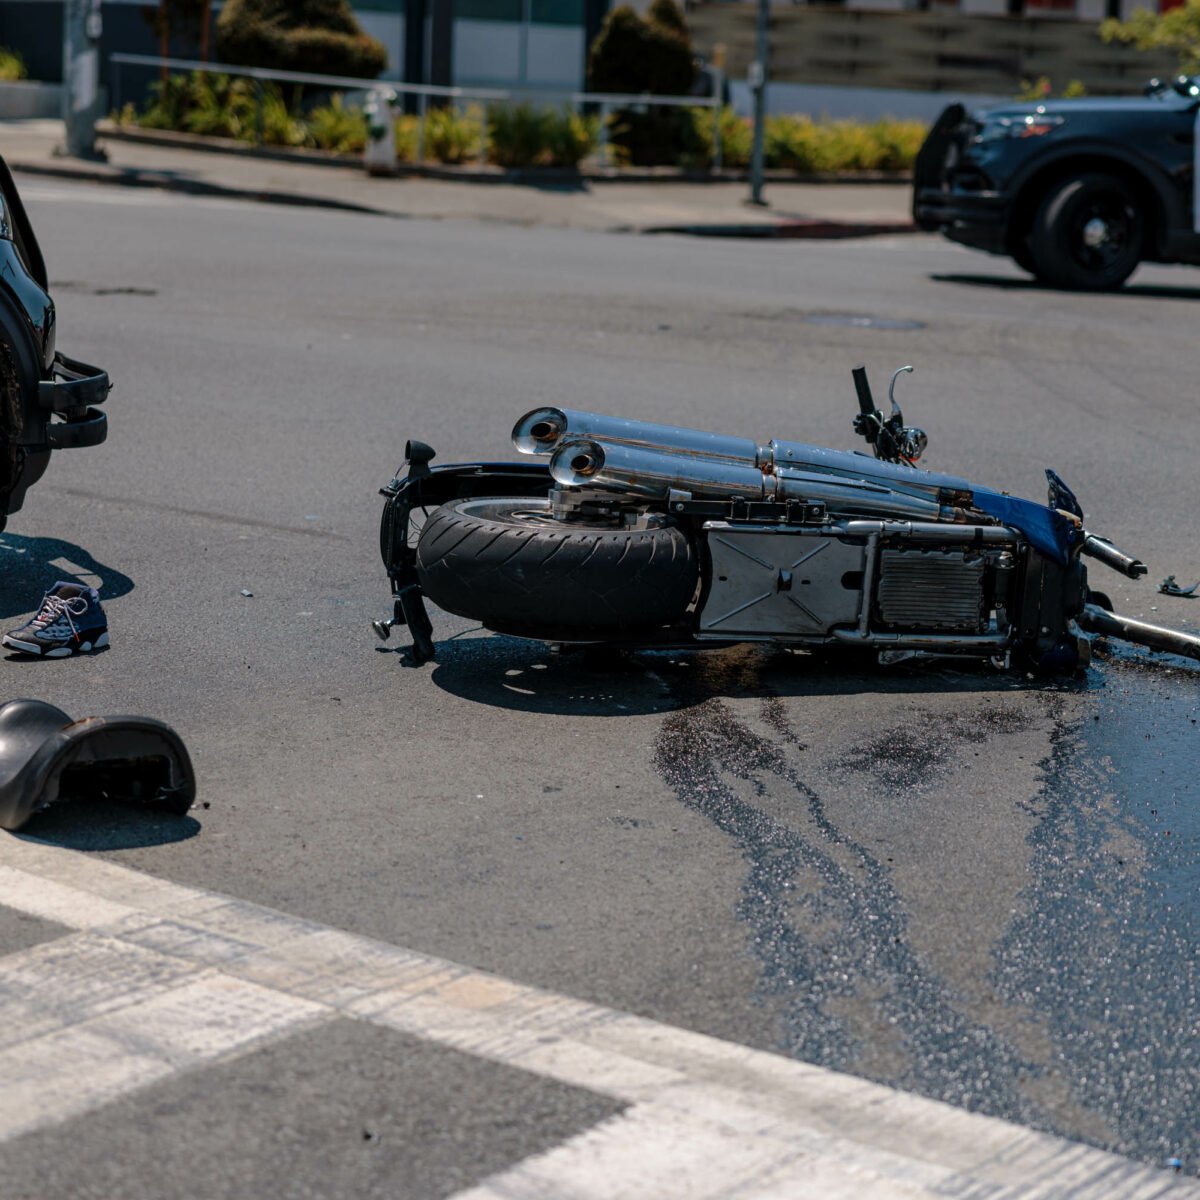 Vallejo police pursuit sends motorcyclist to the hospital